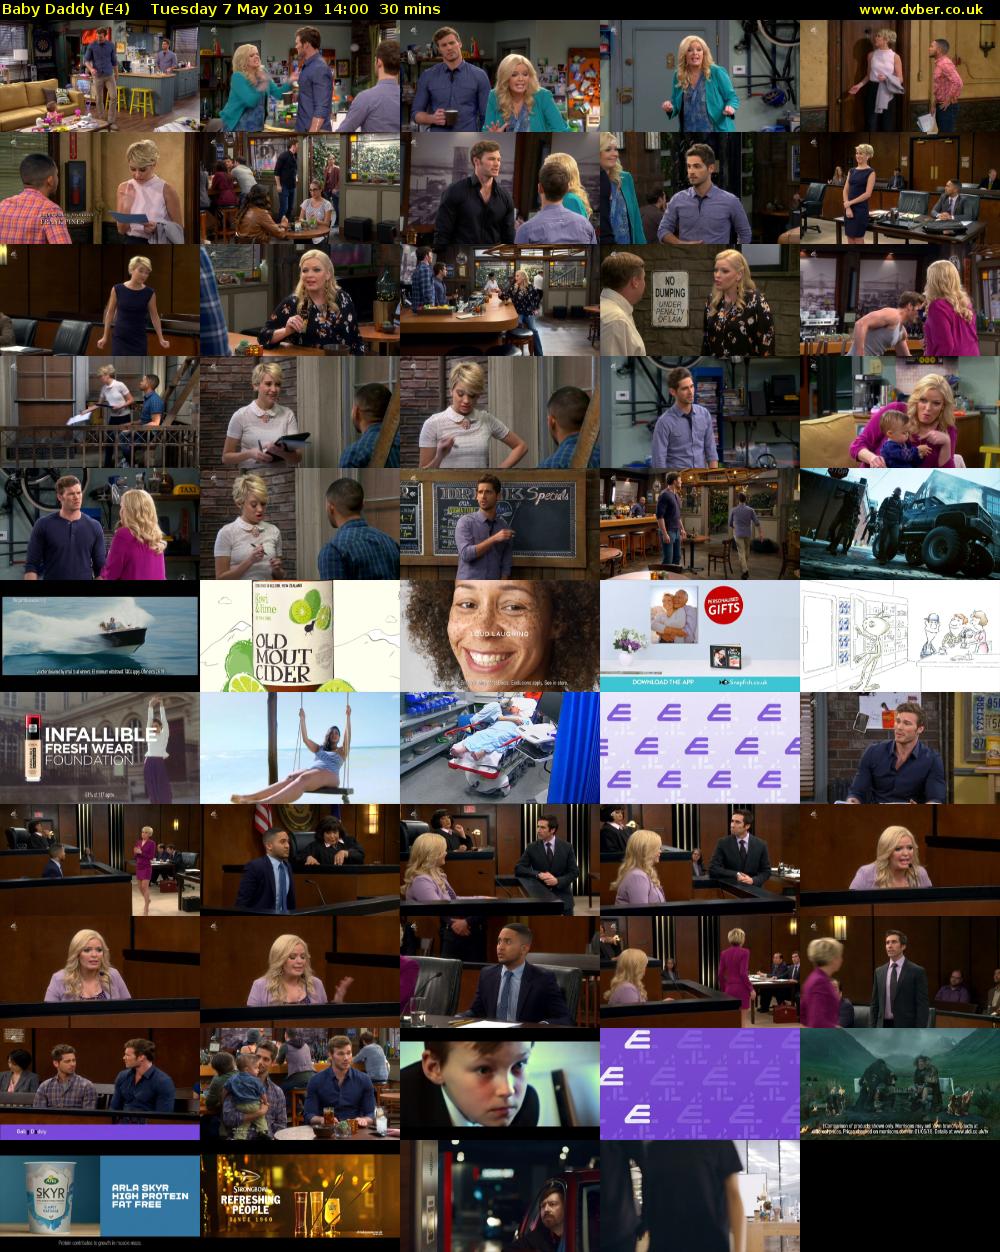 Baby Daddy (E4) Tuesday 7 May 2019 14:00 - 14:30